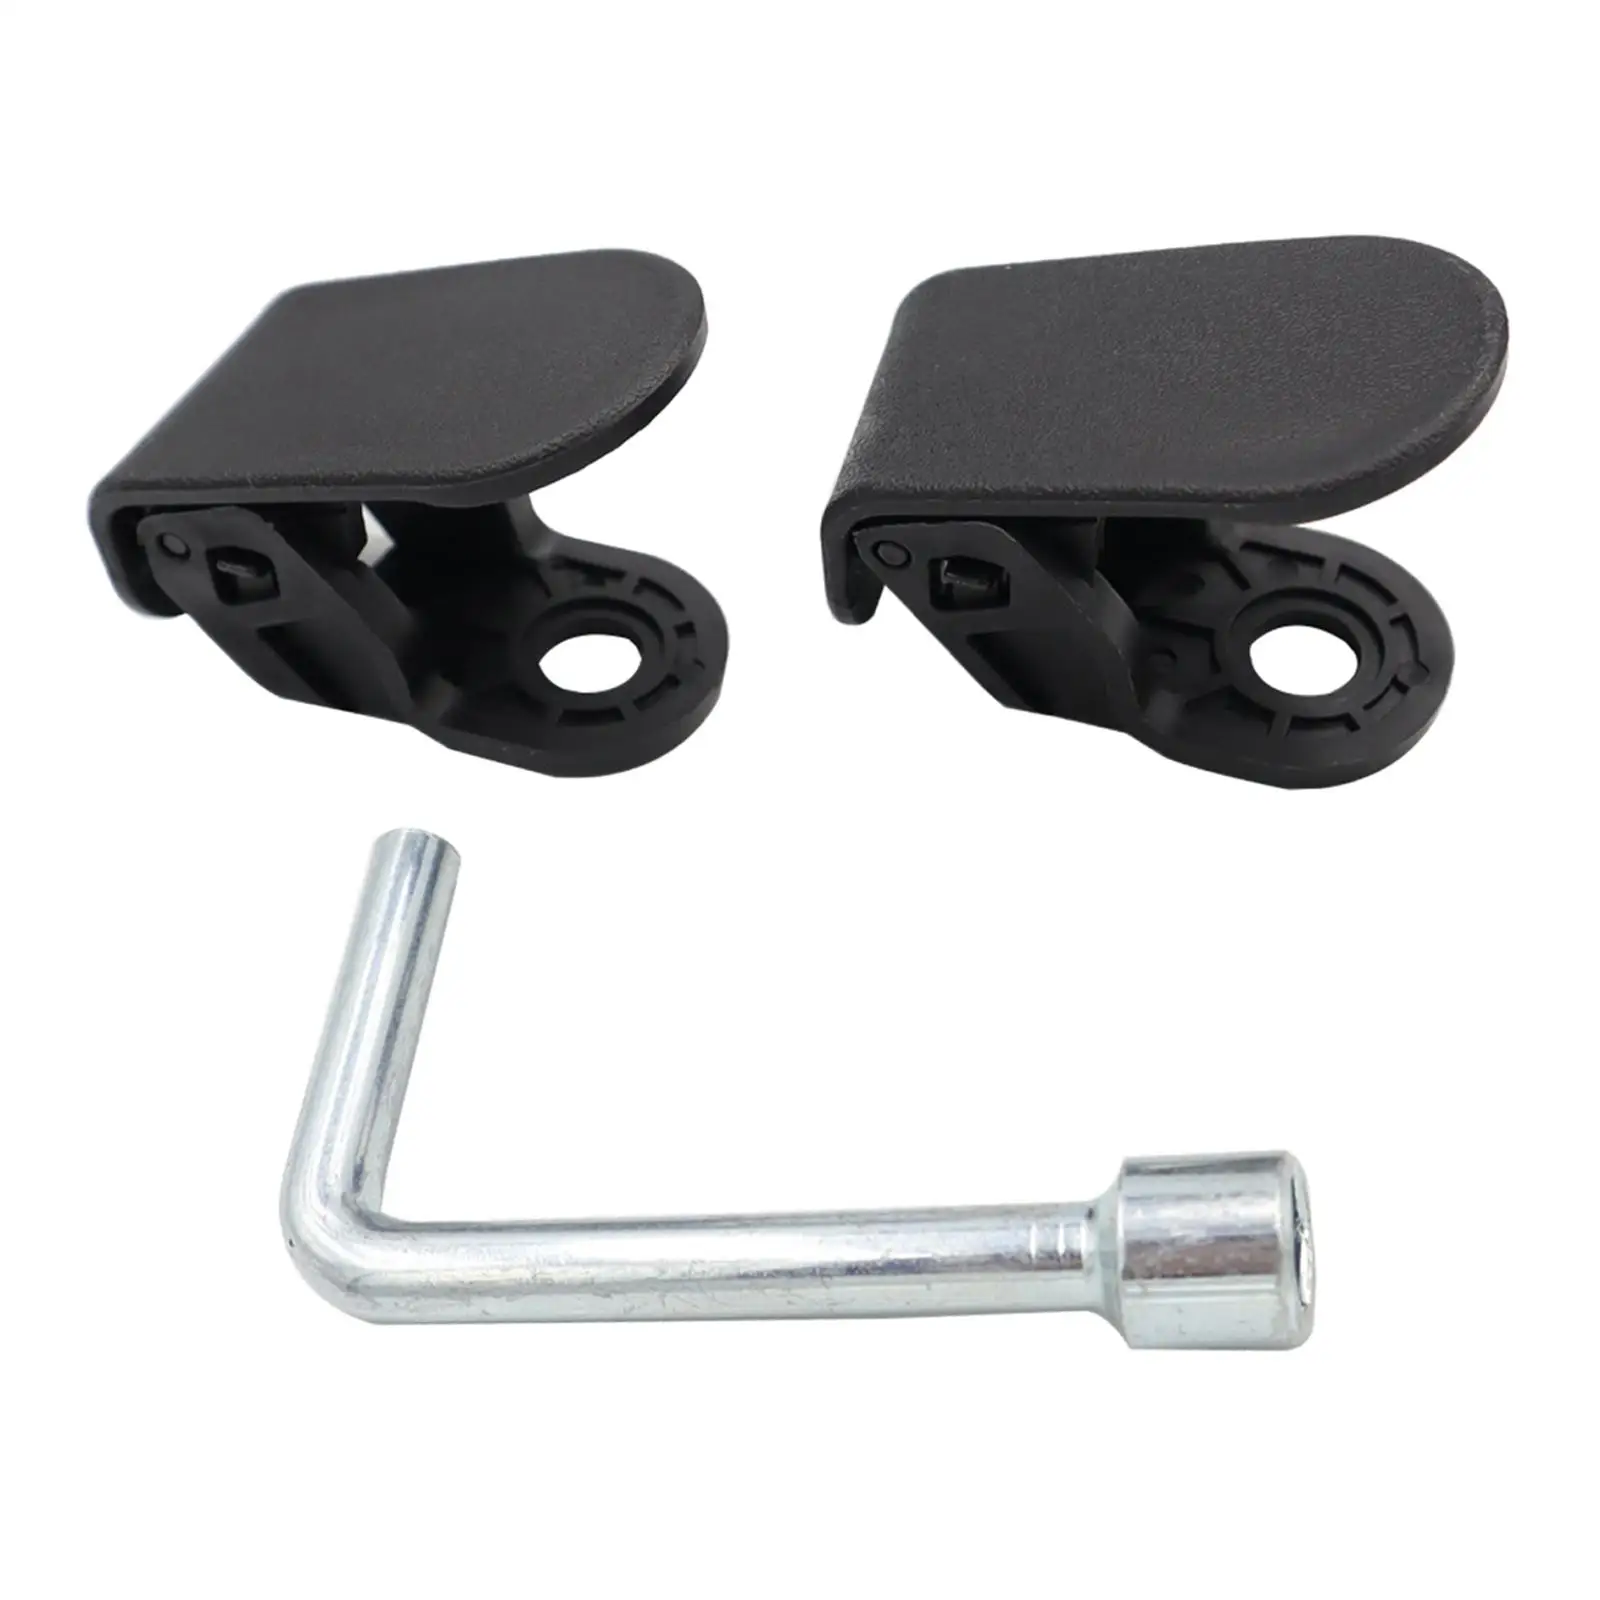 2x Car Front Trunk Hooks Screw Cover Bolt Covers for Tesla Model 3 19-20 Easy Installation High Performance Accessories